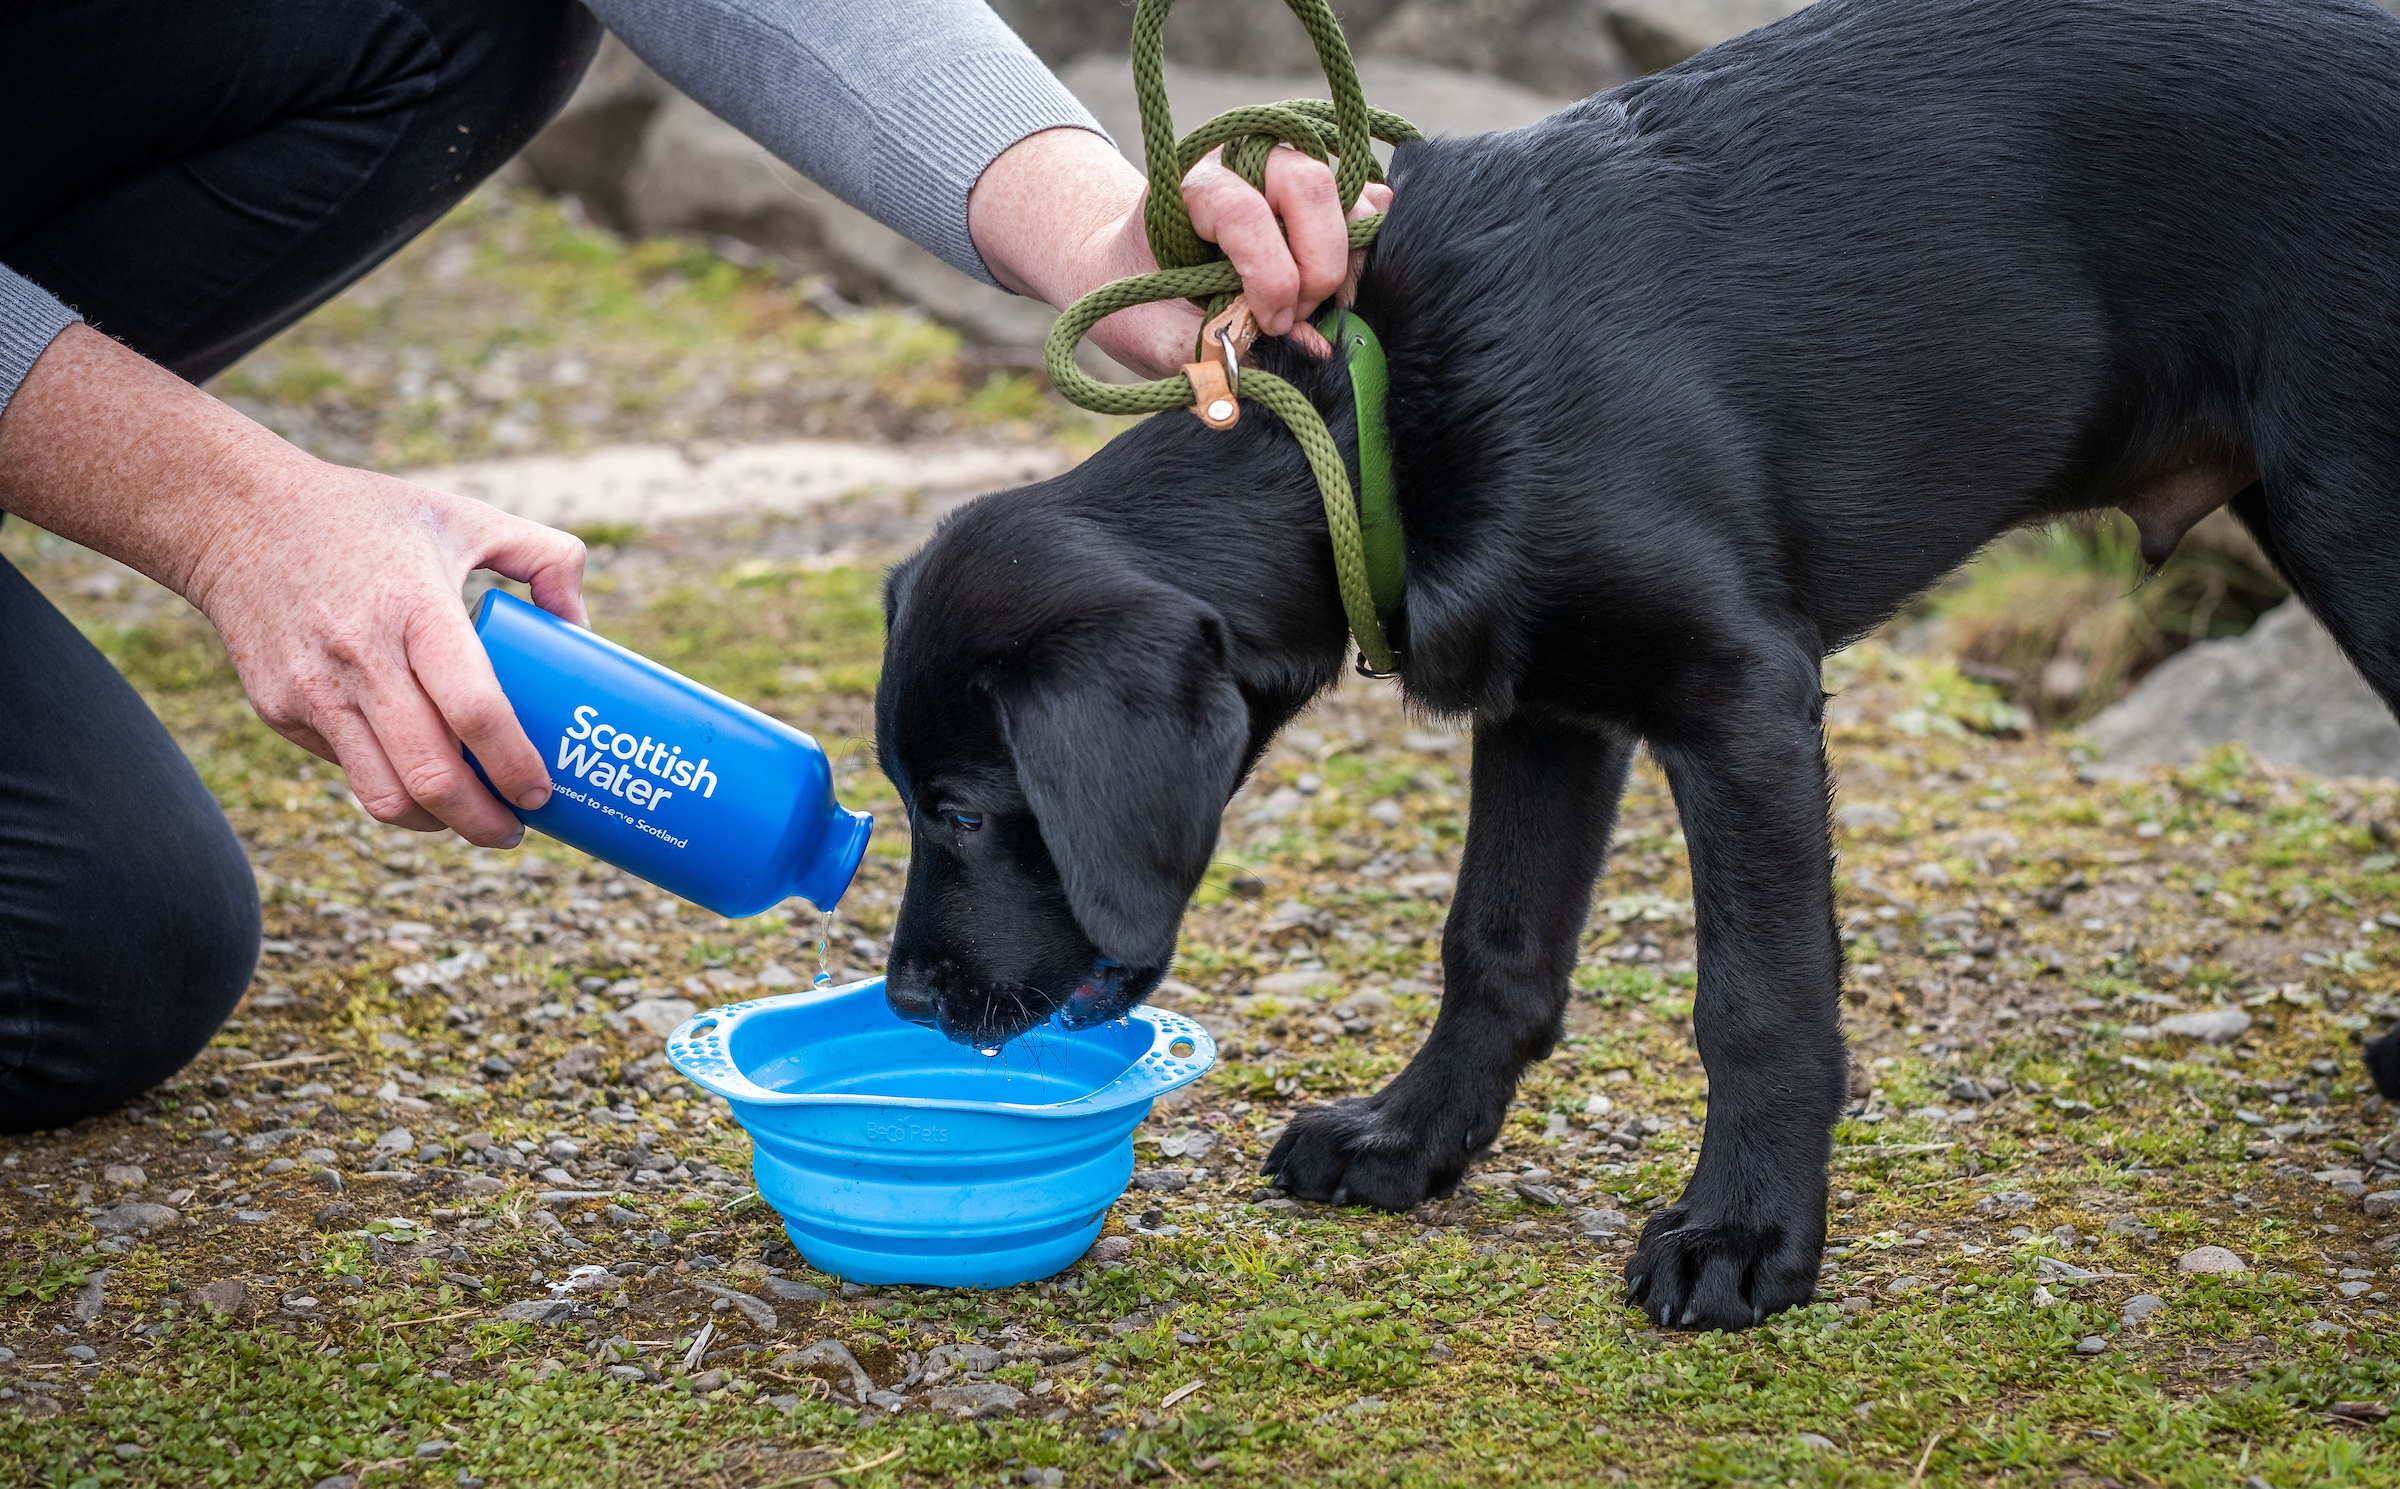 SCOTTISH WATER’S LATEST TOP UP TAP IS PAWSOME!